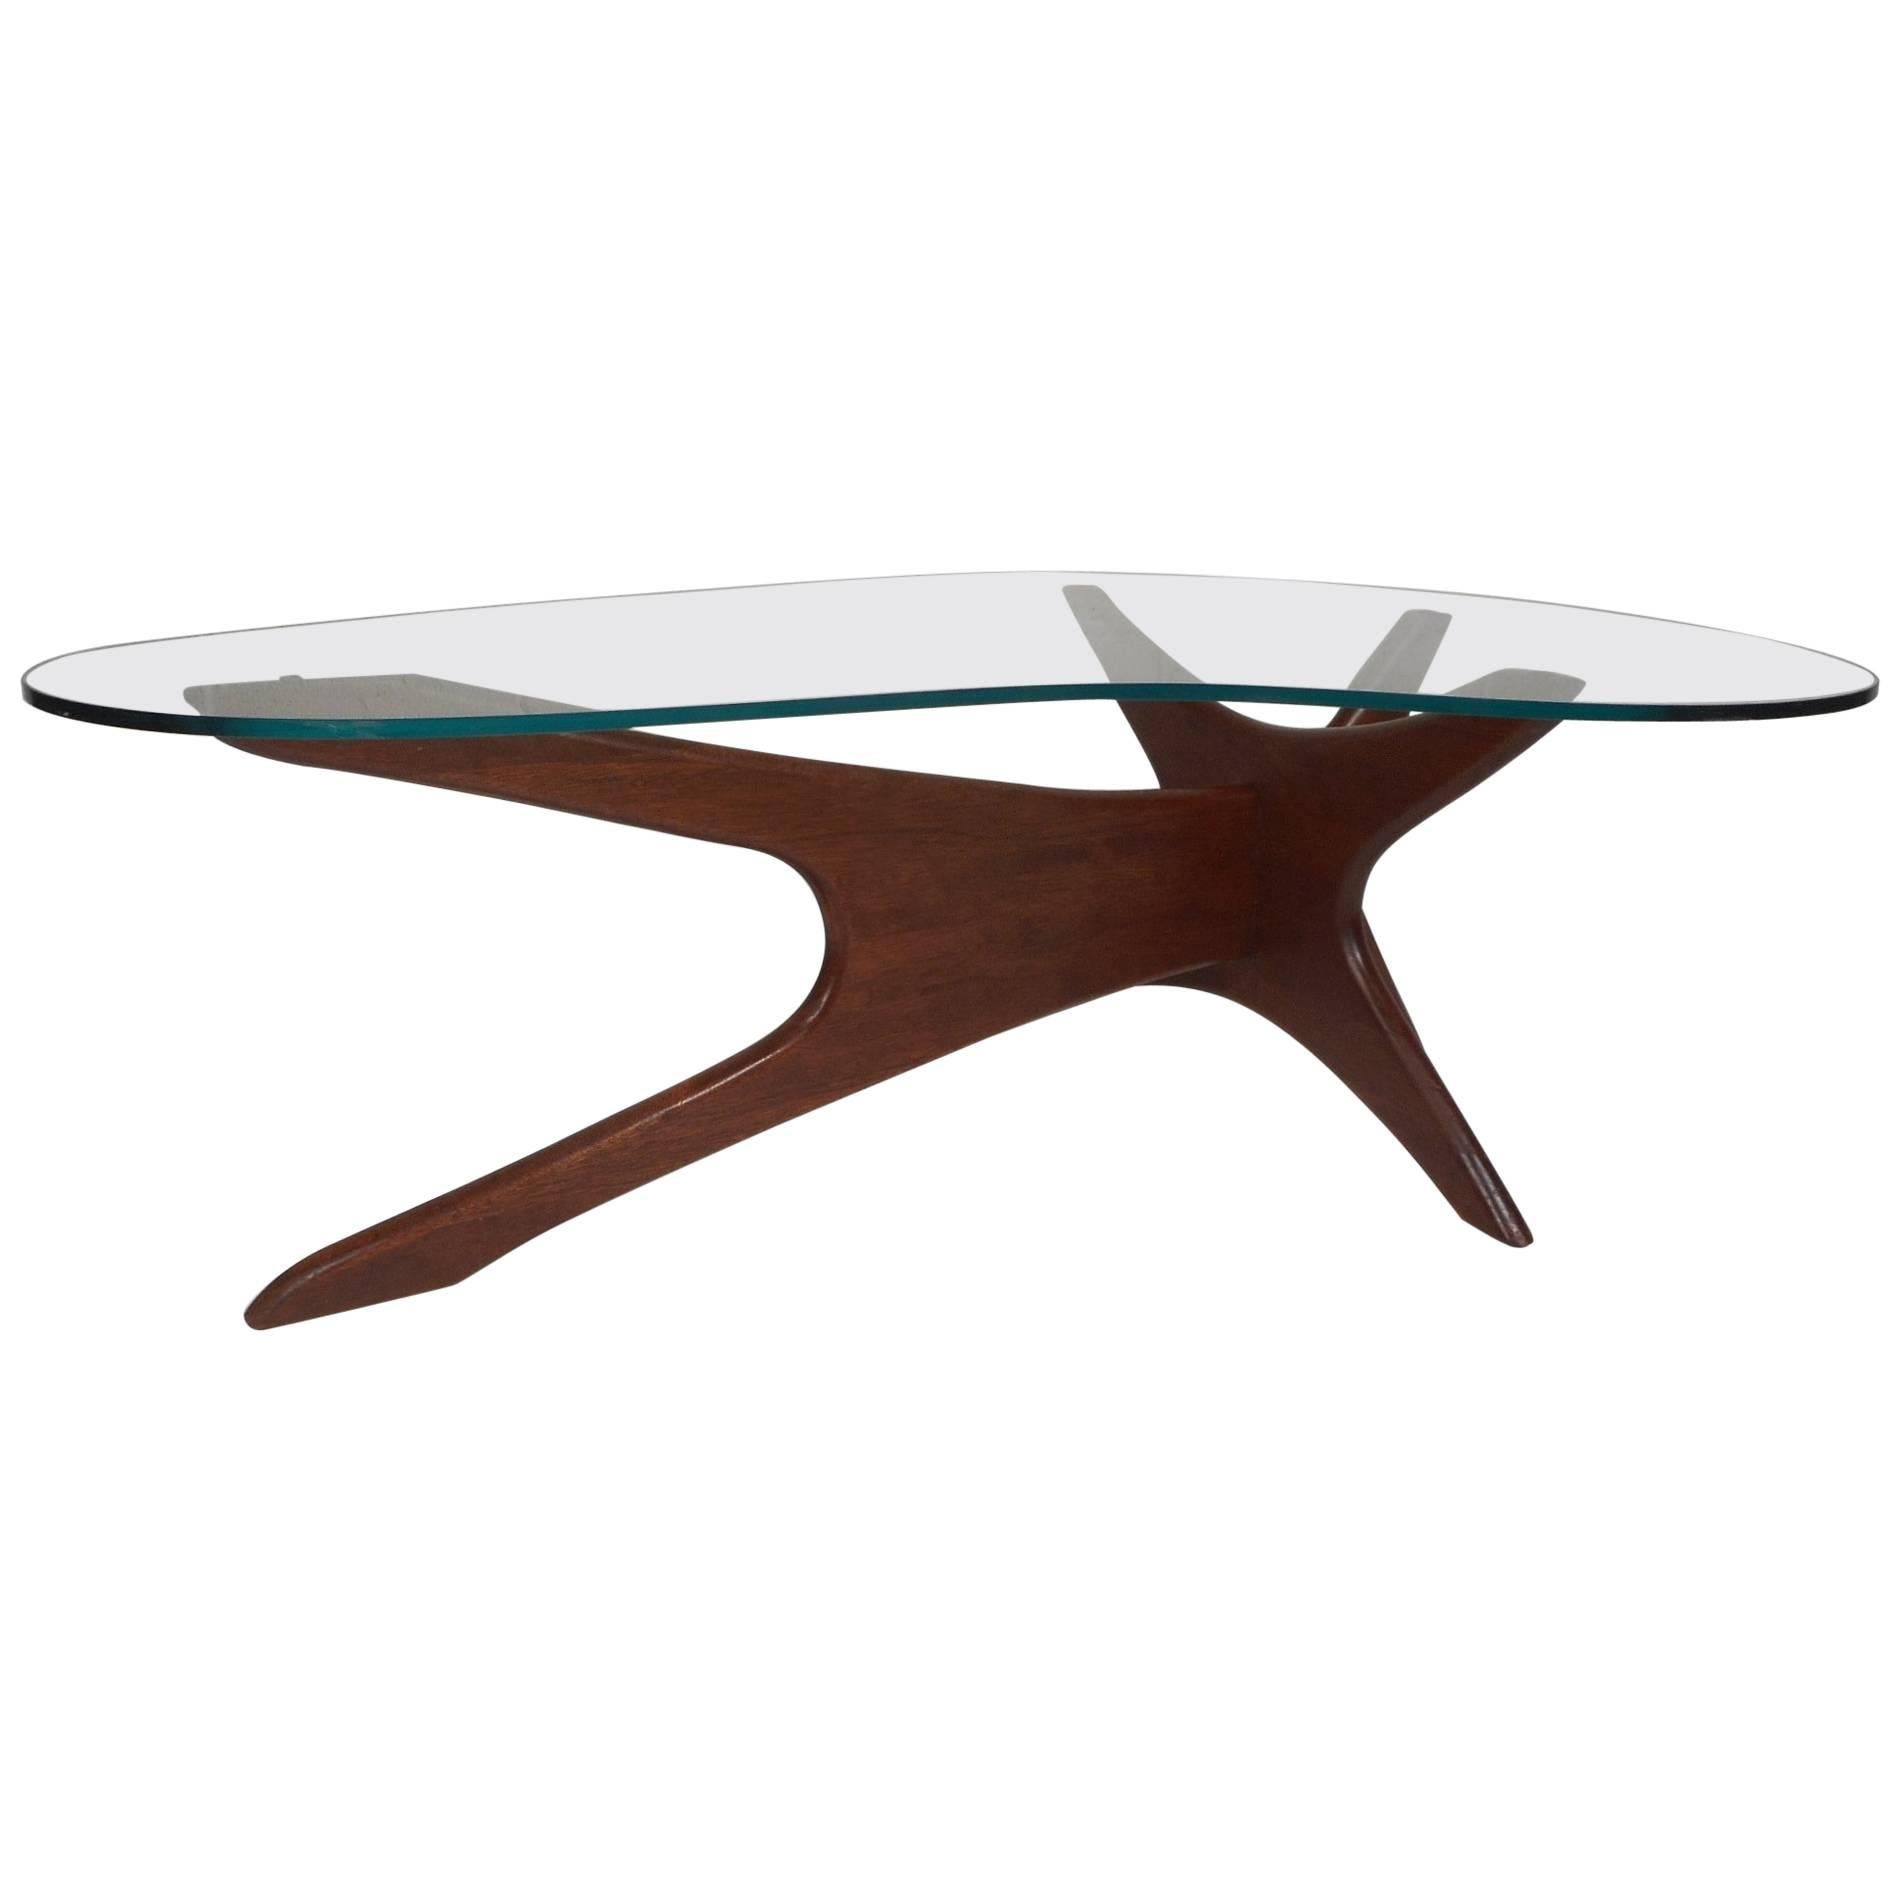 Adrian Pearsall for Craft Associates Coffee Table